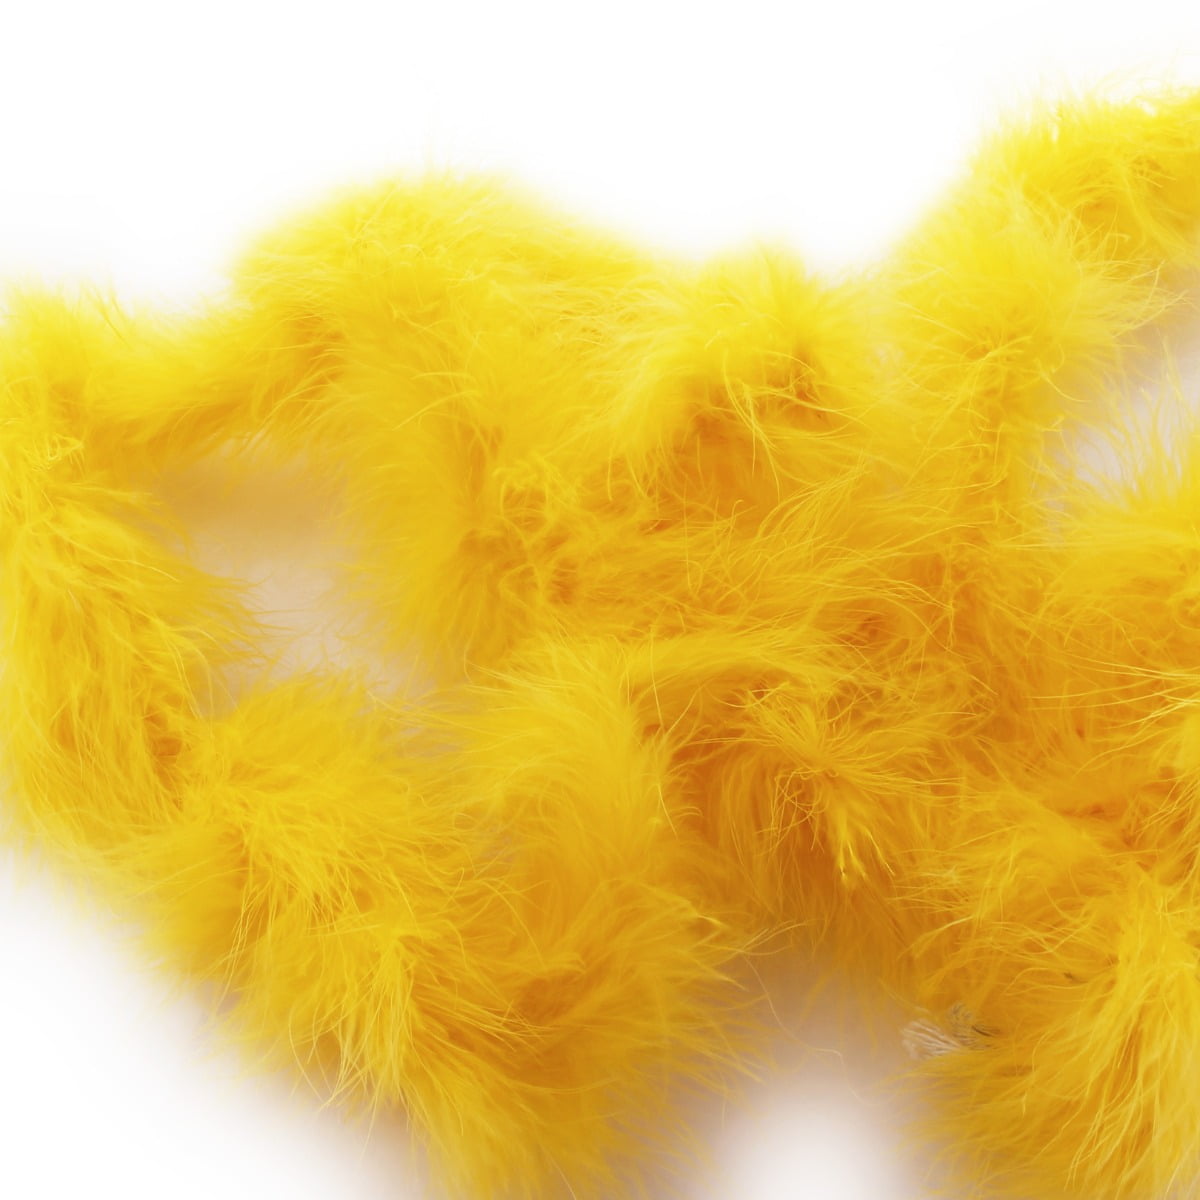 Feather boas at the Klein Karoo Feathers Factory, A worker …